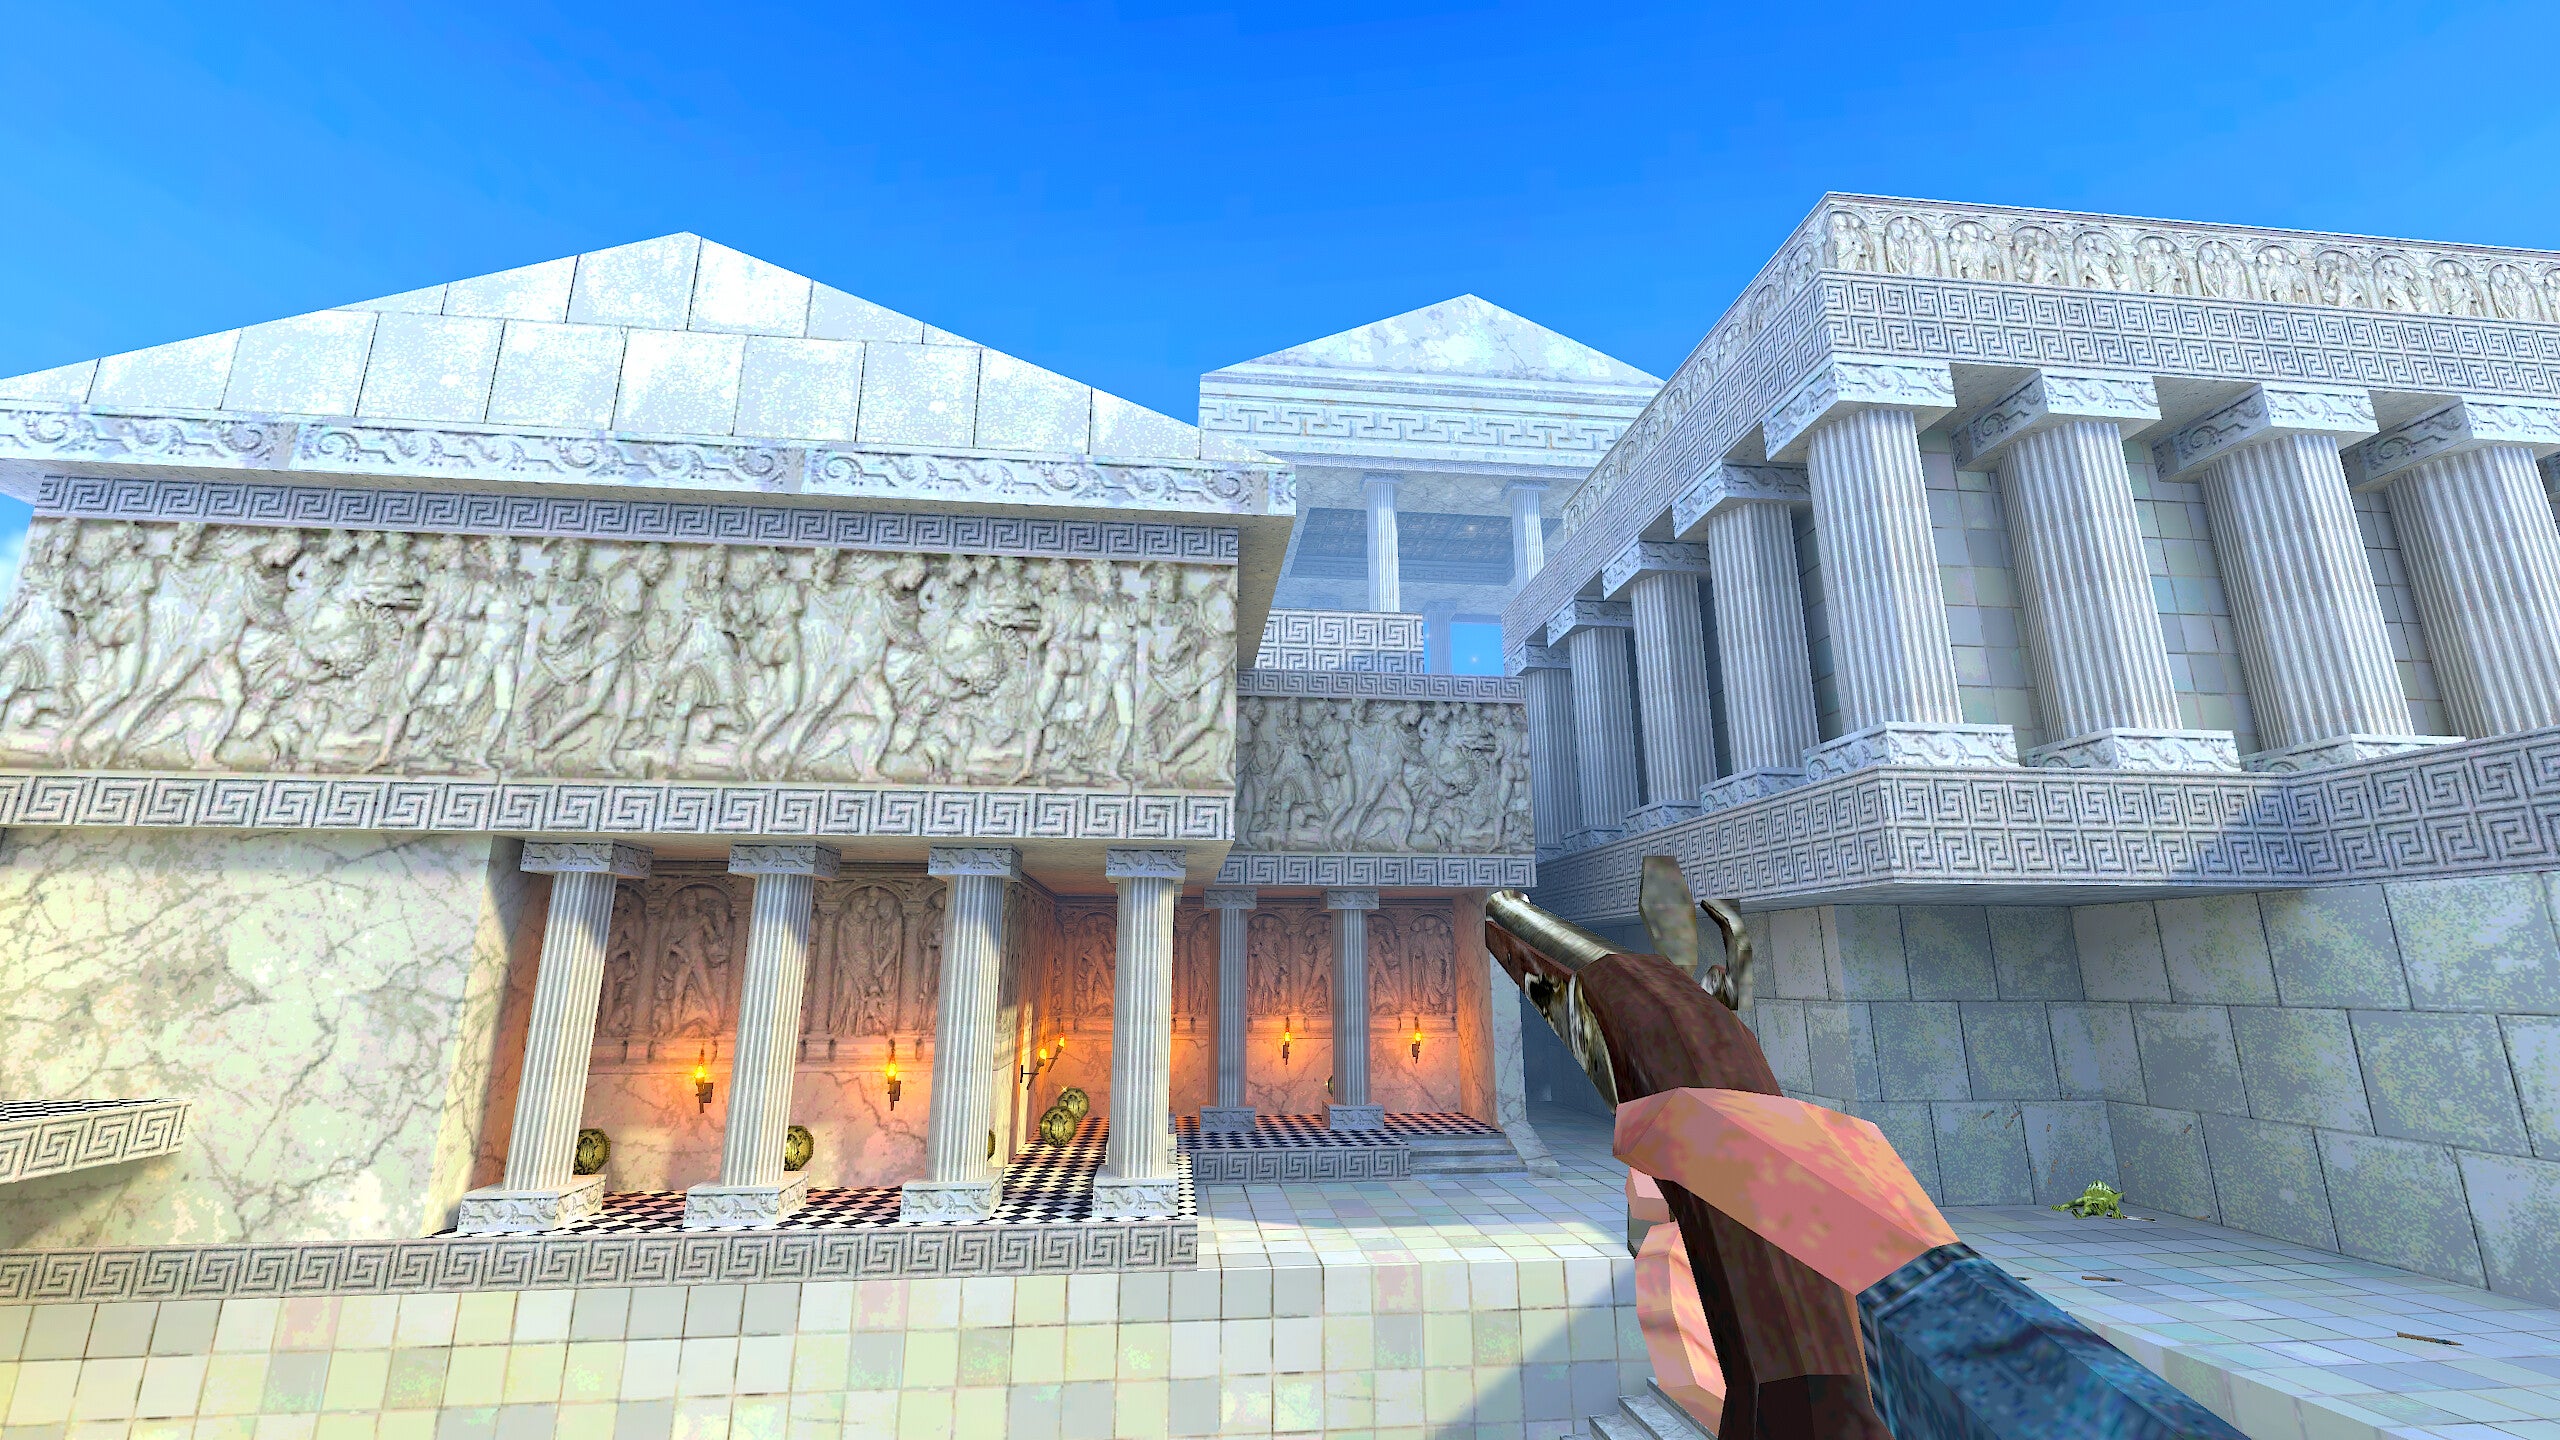 A screenshot from retro-style FPS Chop Goblins, which shows the player pointing a flintlock pistol at an ancient Greek structure.